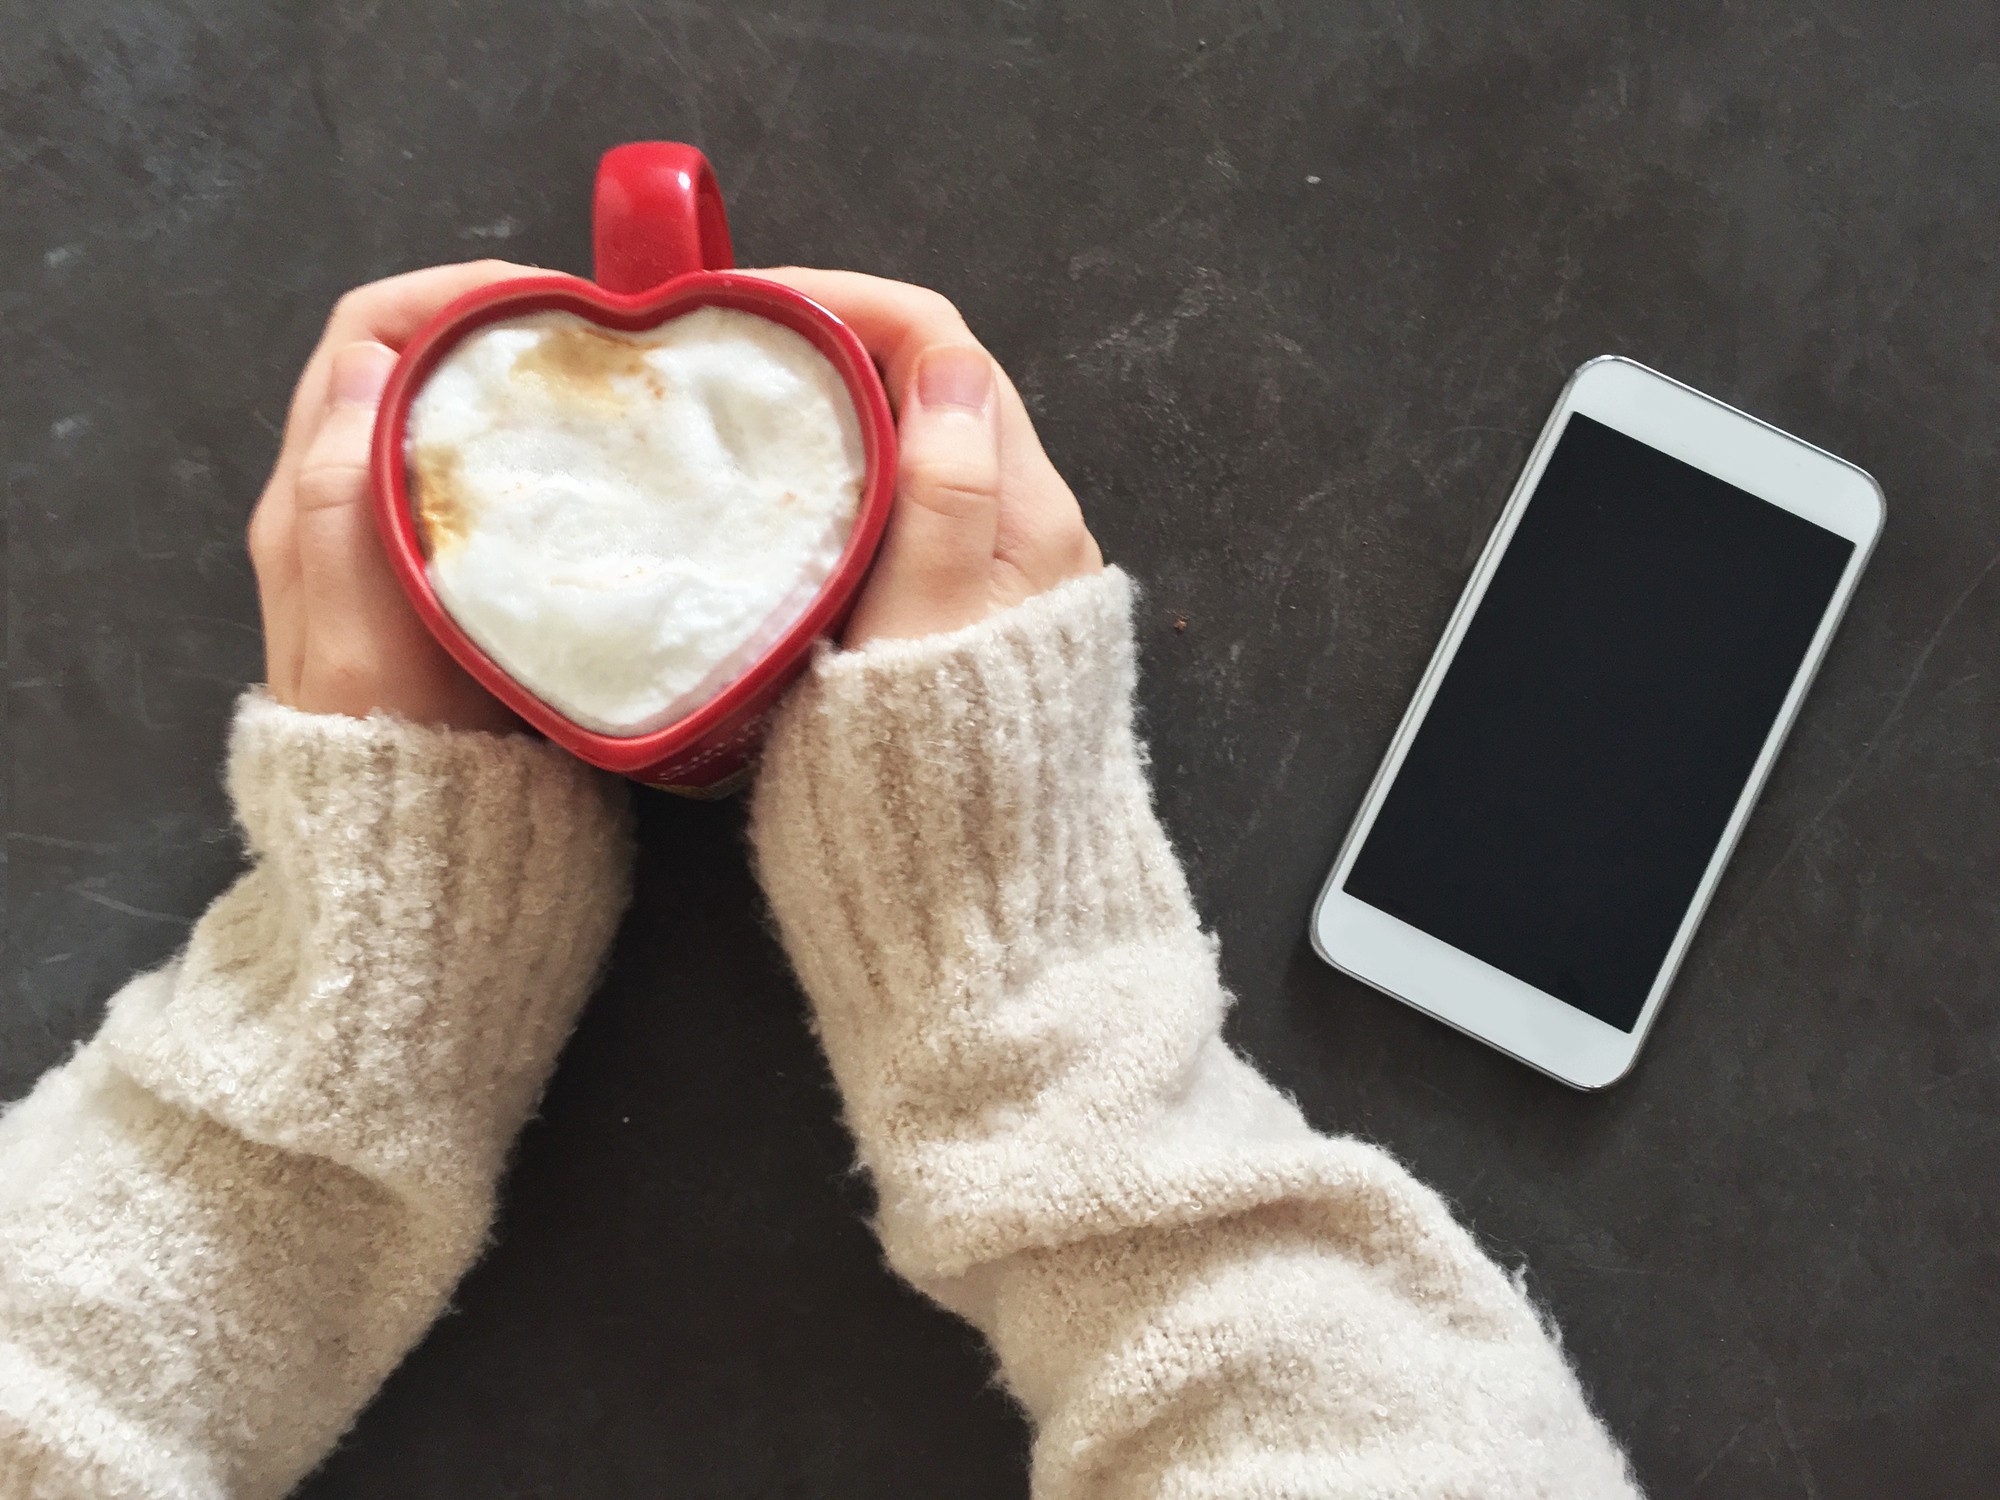 Apps can make dating a lot more fun and can strengthen a relationship.